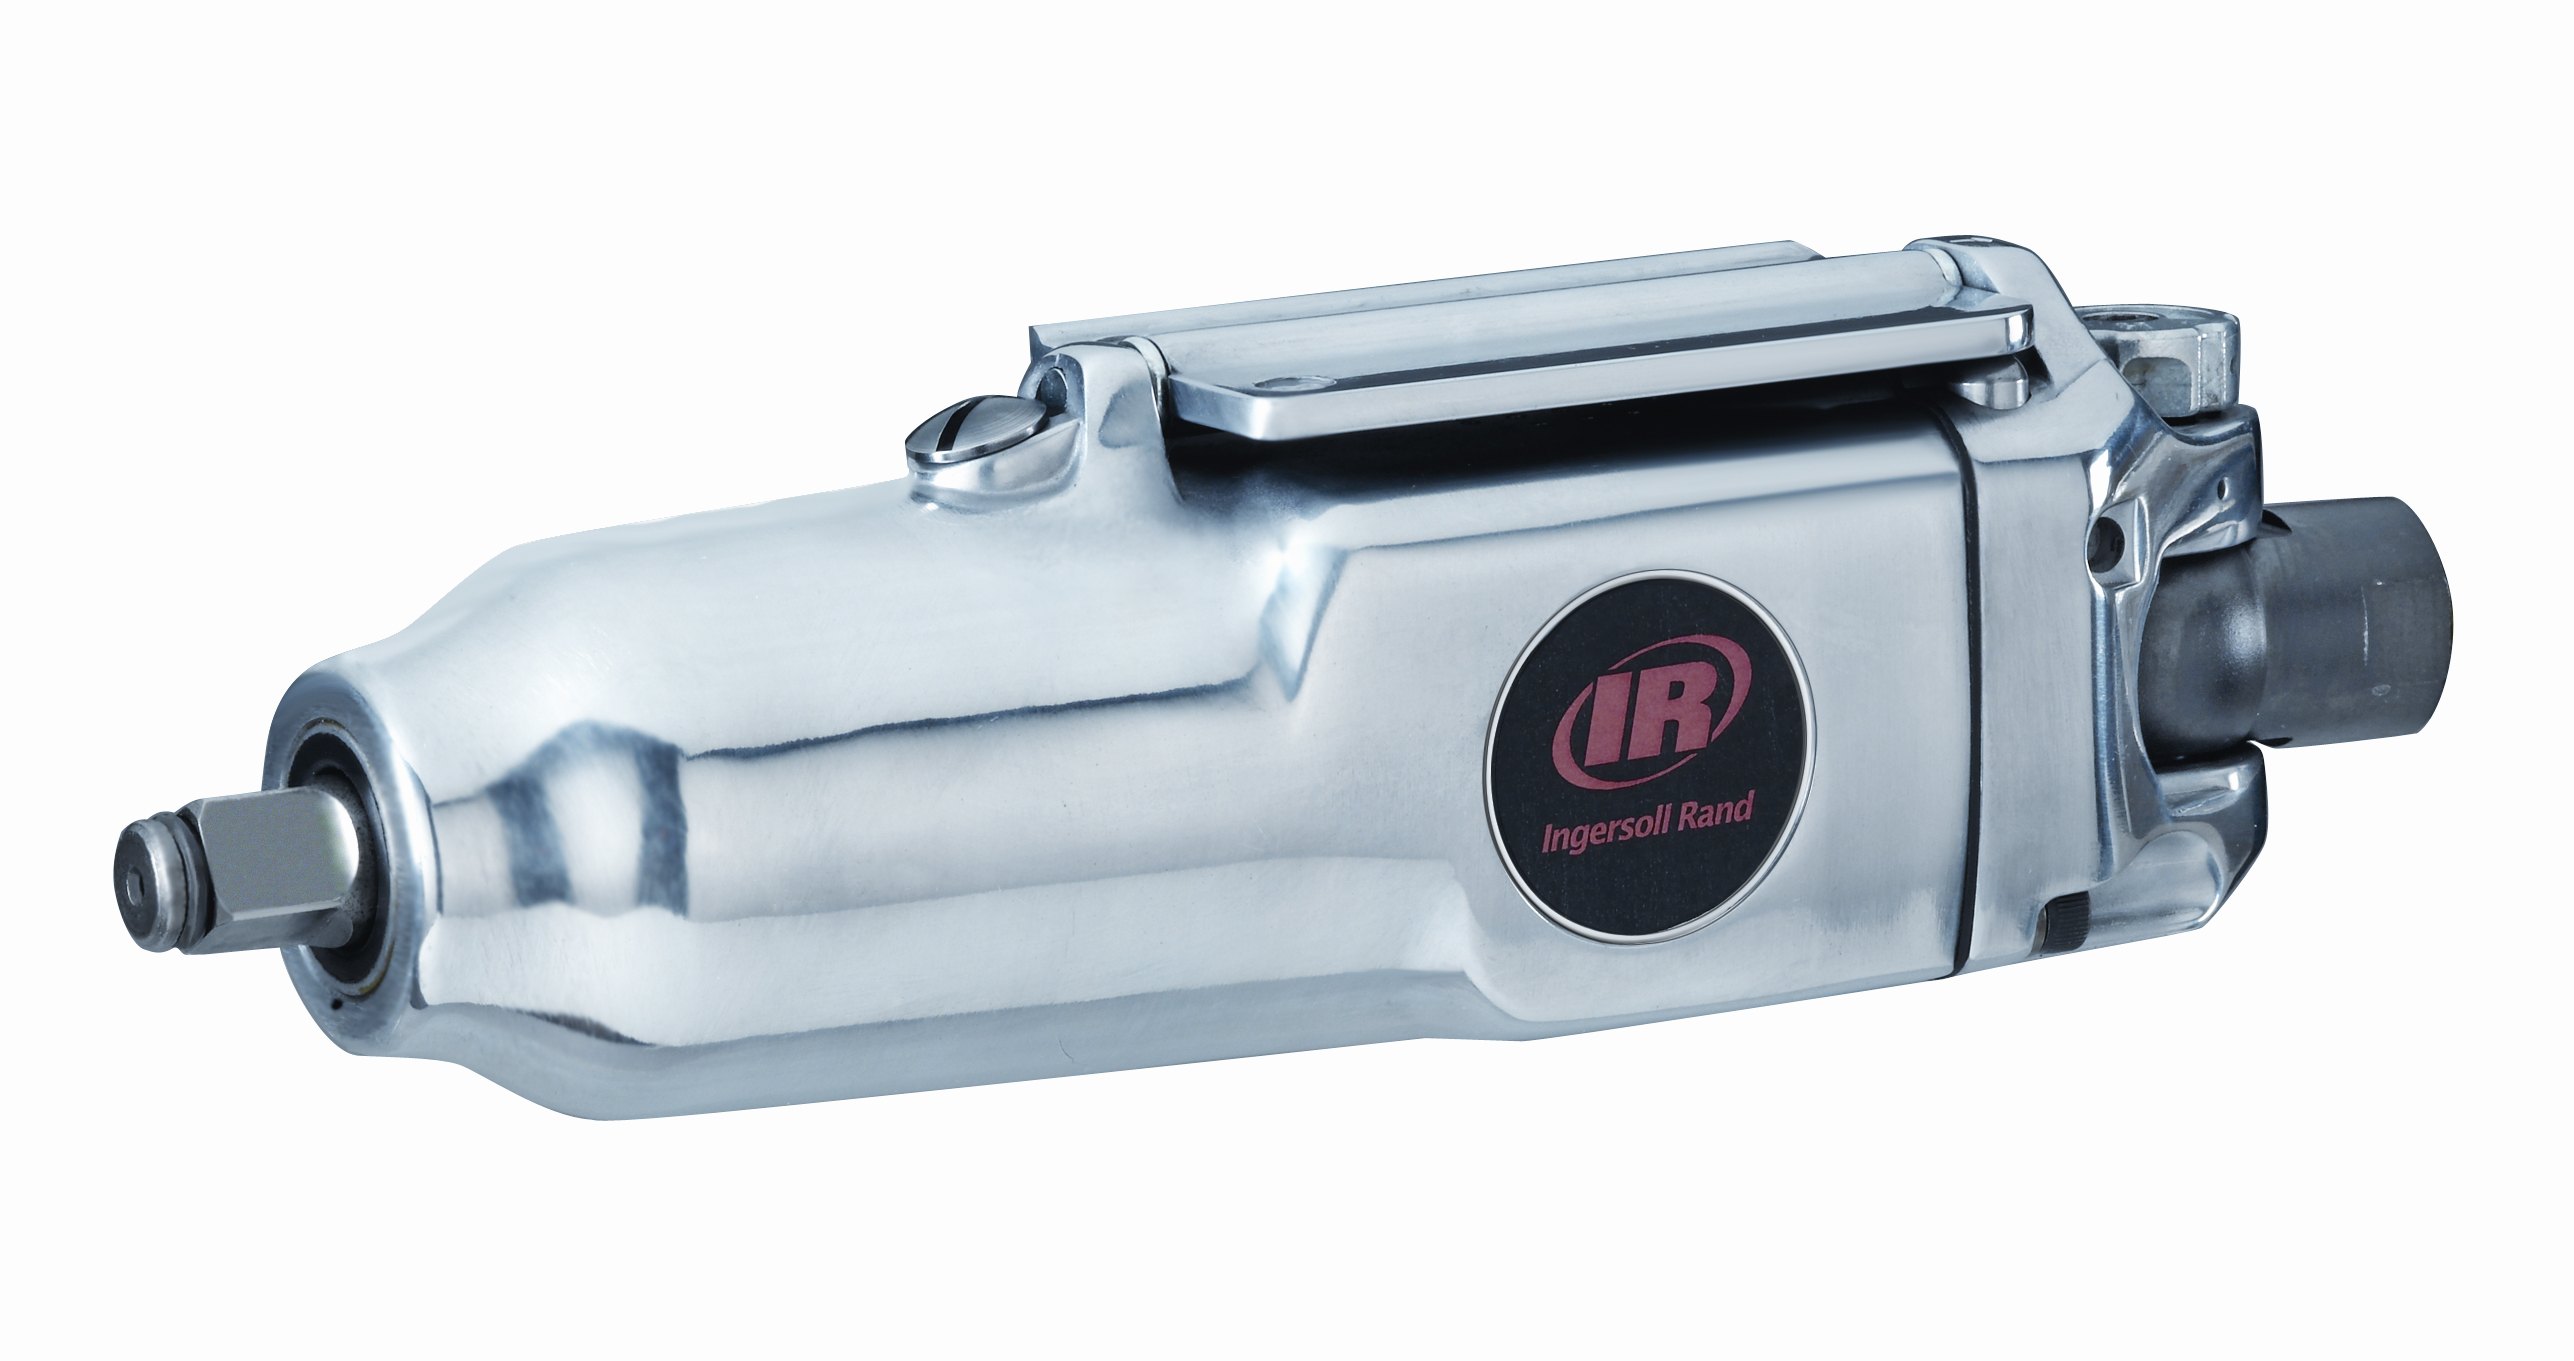 Ingersoll Rand  Air Power is an authorized Ingersoll Rand distributor